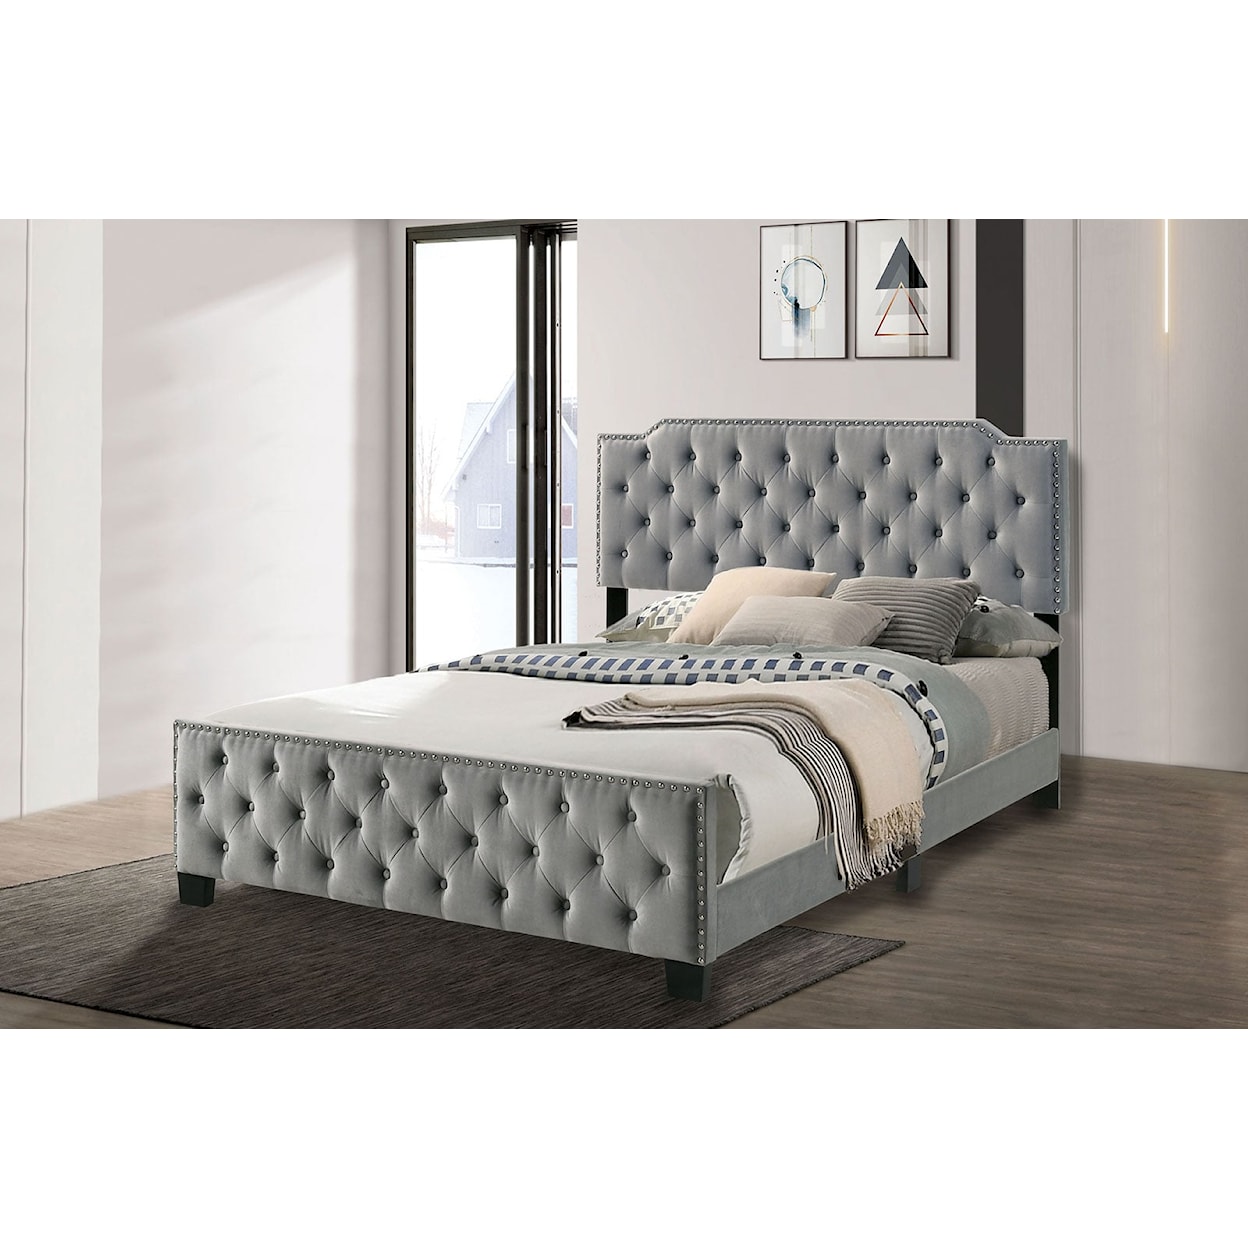 Furniture of America Charlize California King Bed